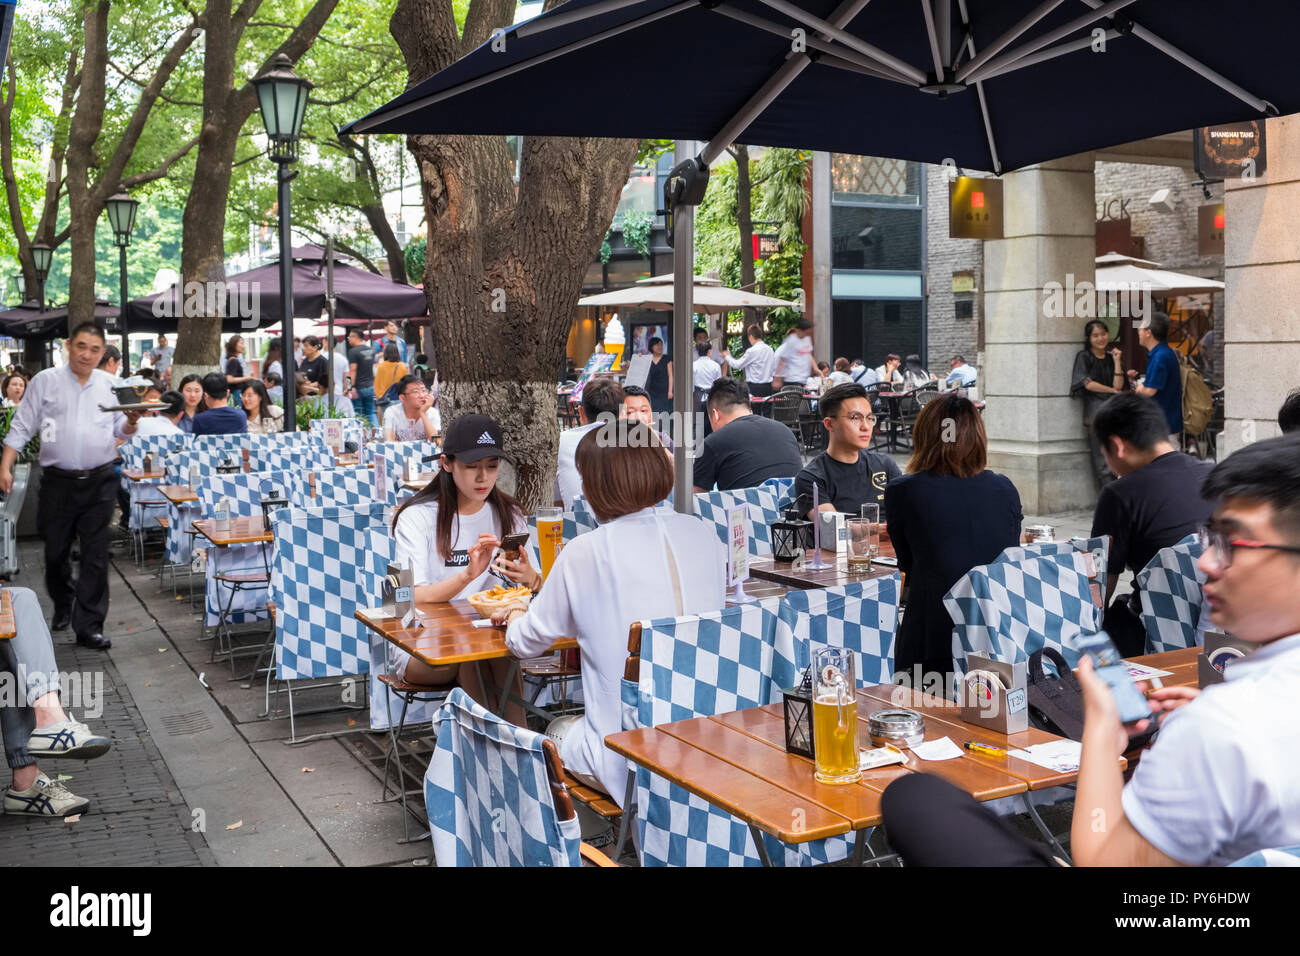 People eating and drinking at a pavement cafe restaurant outside in the Xintiandi development of the Old French Concession, Shanghai, China, Asia Stock Photo